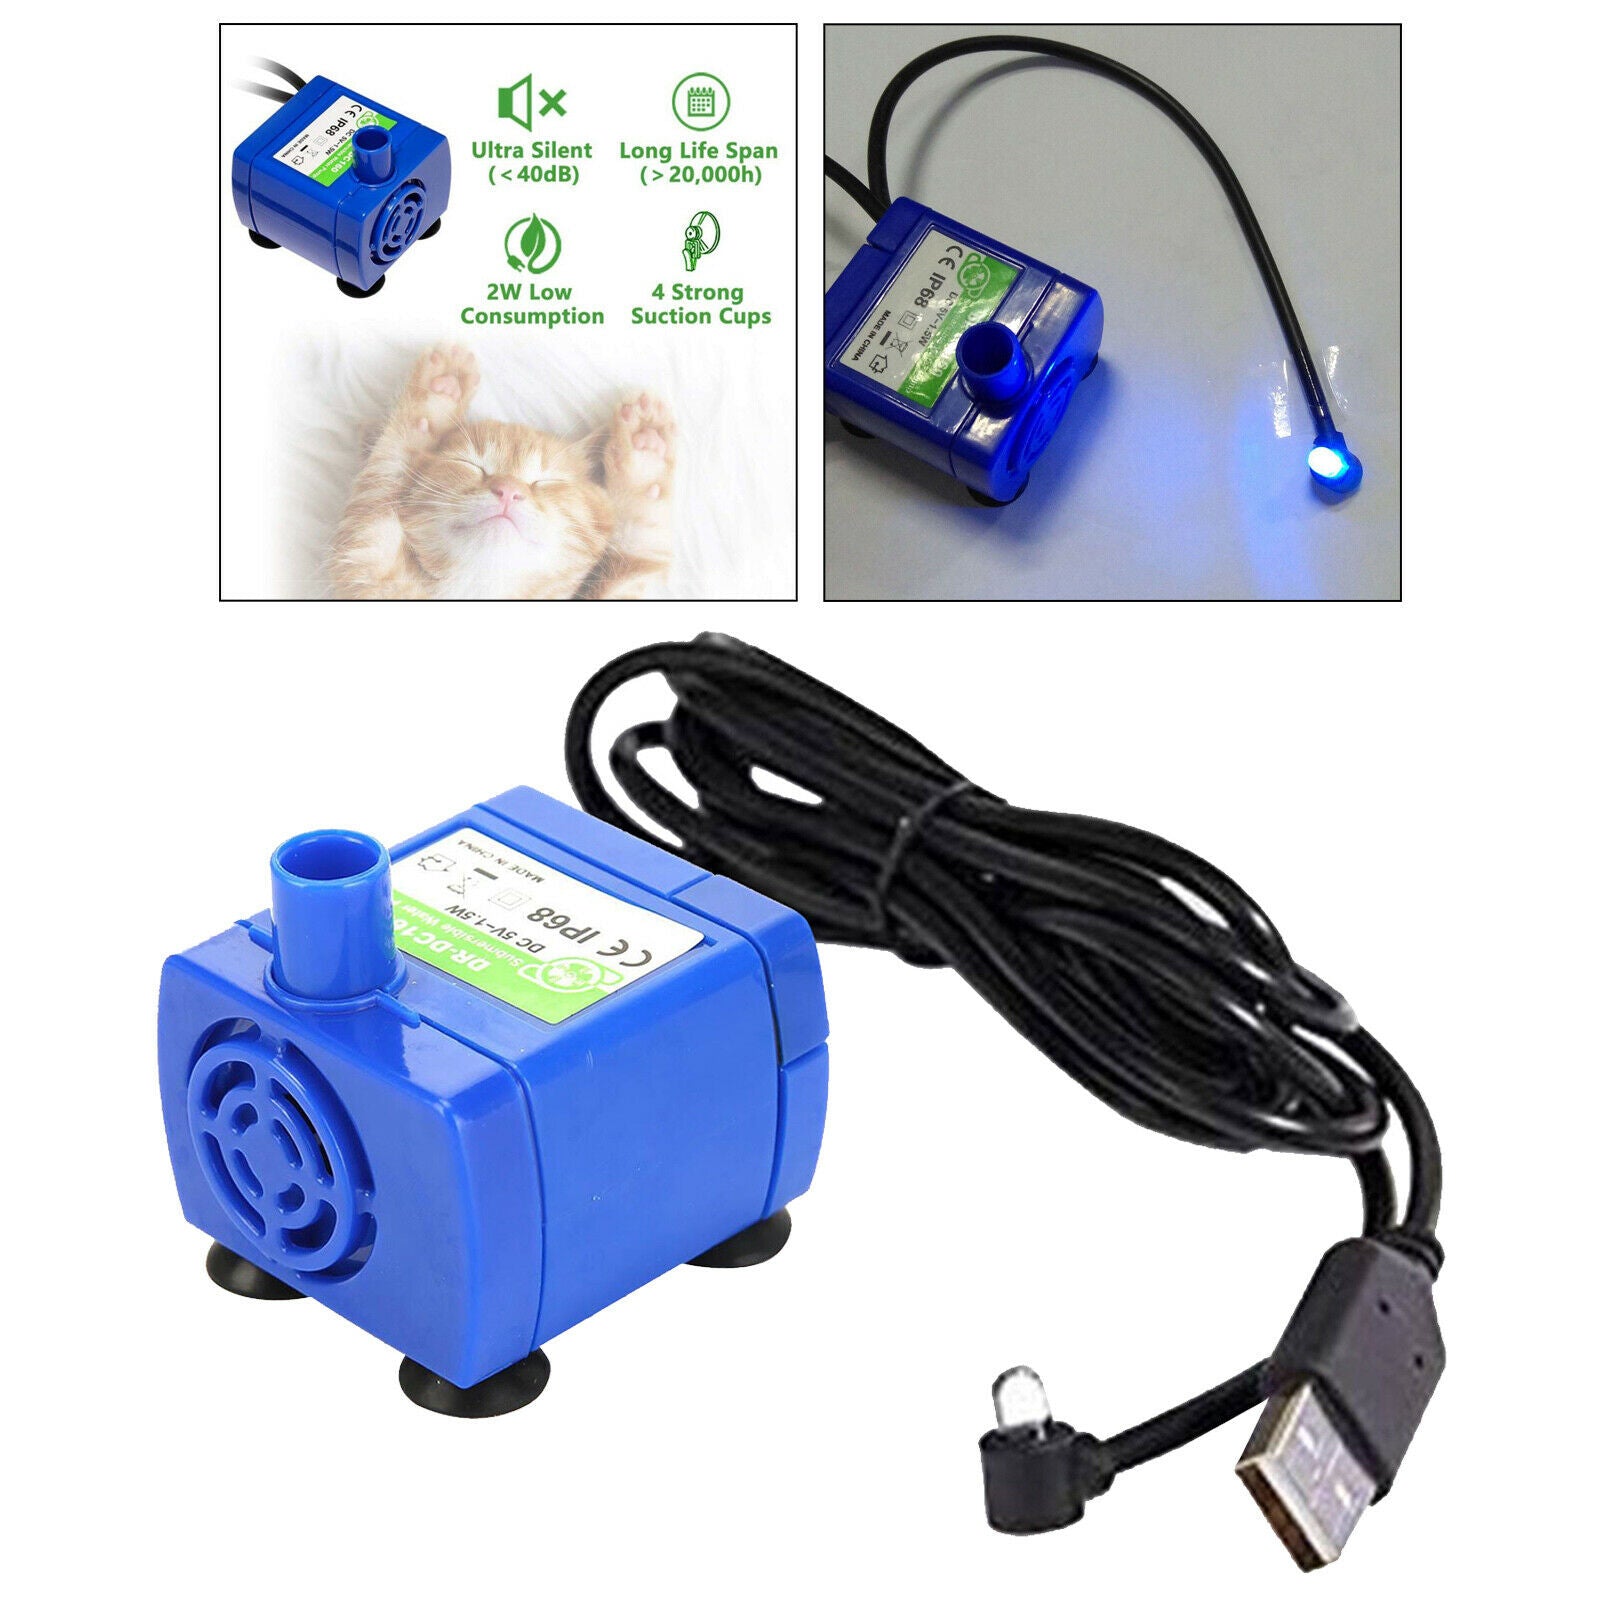 Super Silent Drinking Fountain Pump with LED for Cats Dogs Drinking Bowl